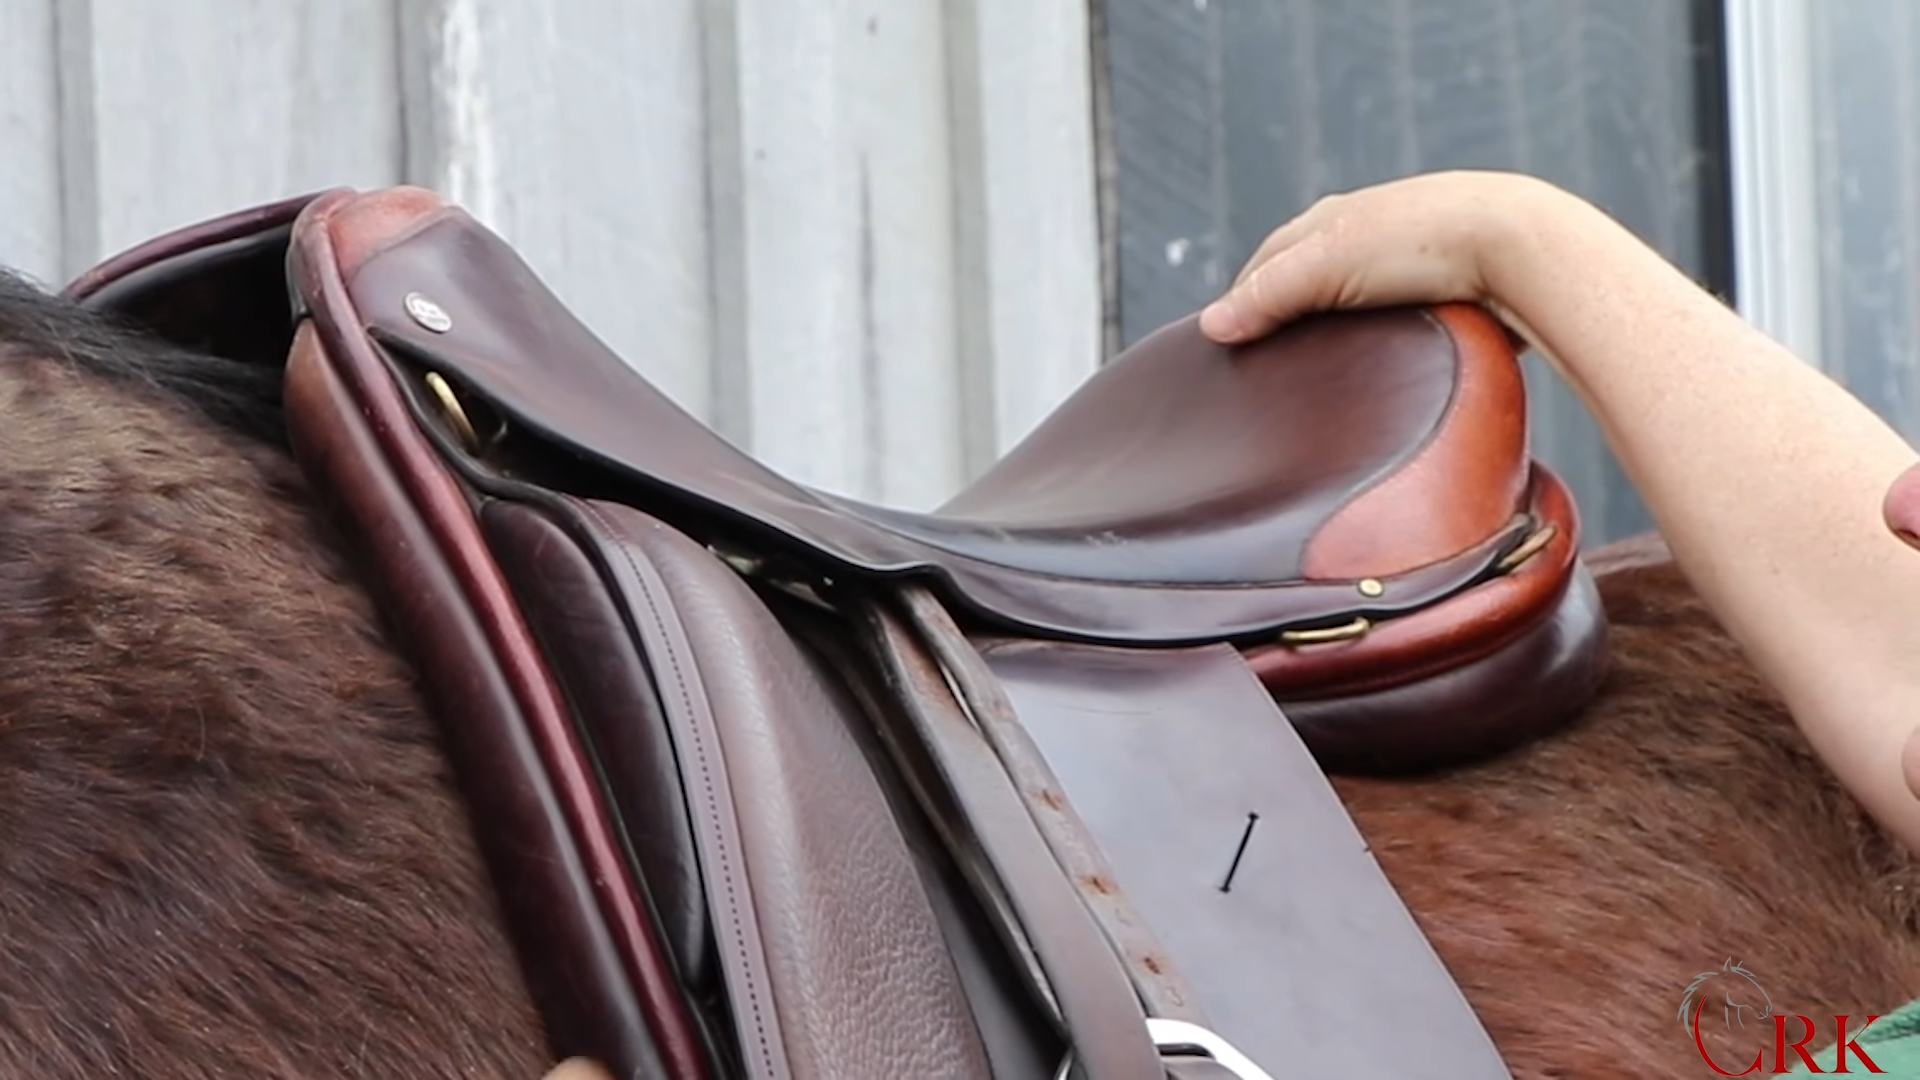 saddle placement